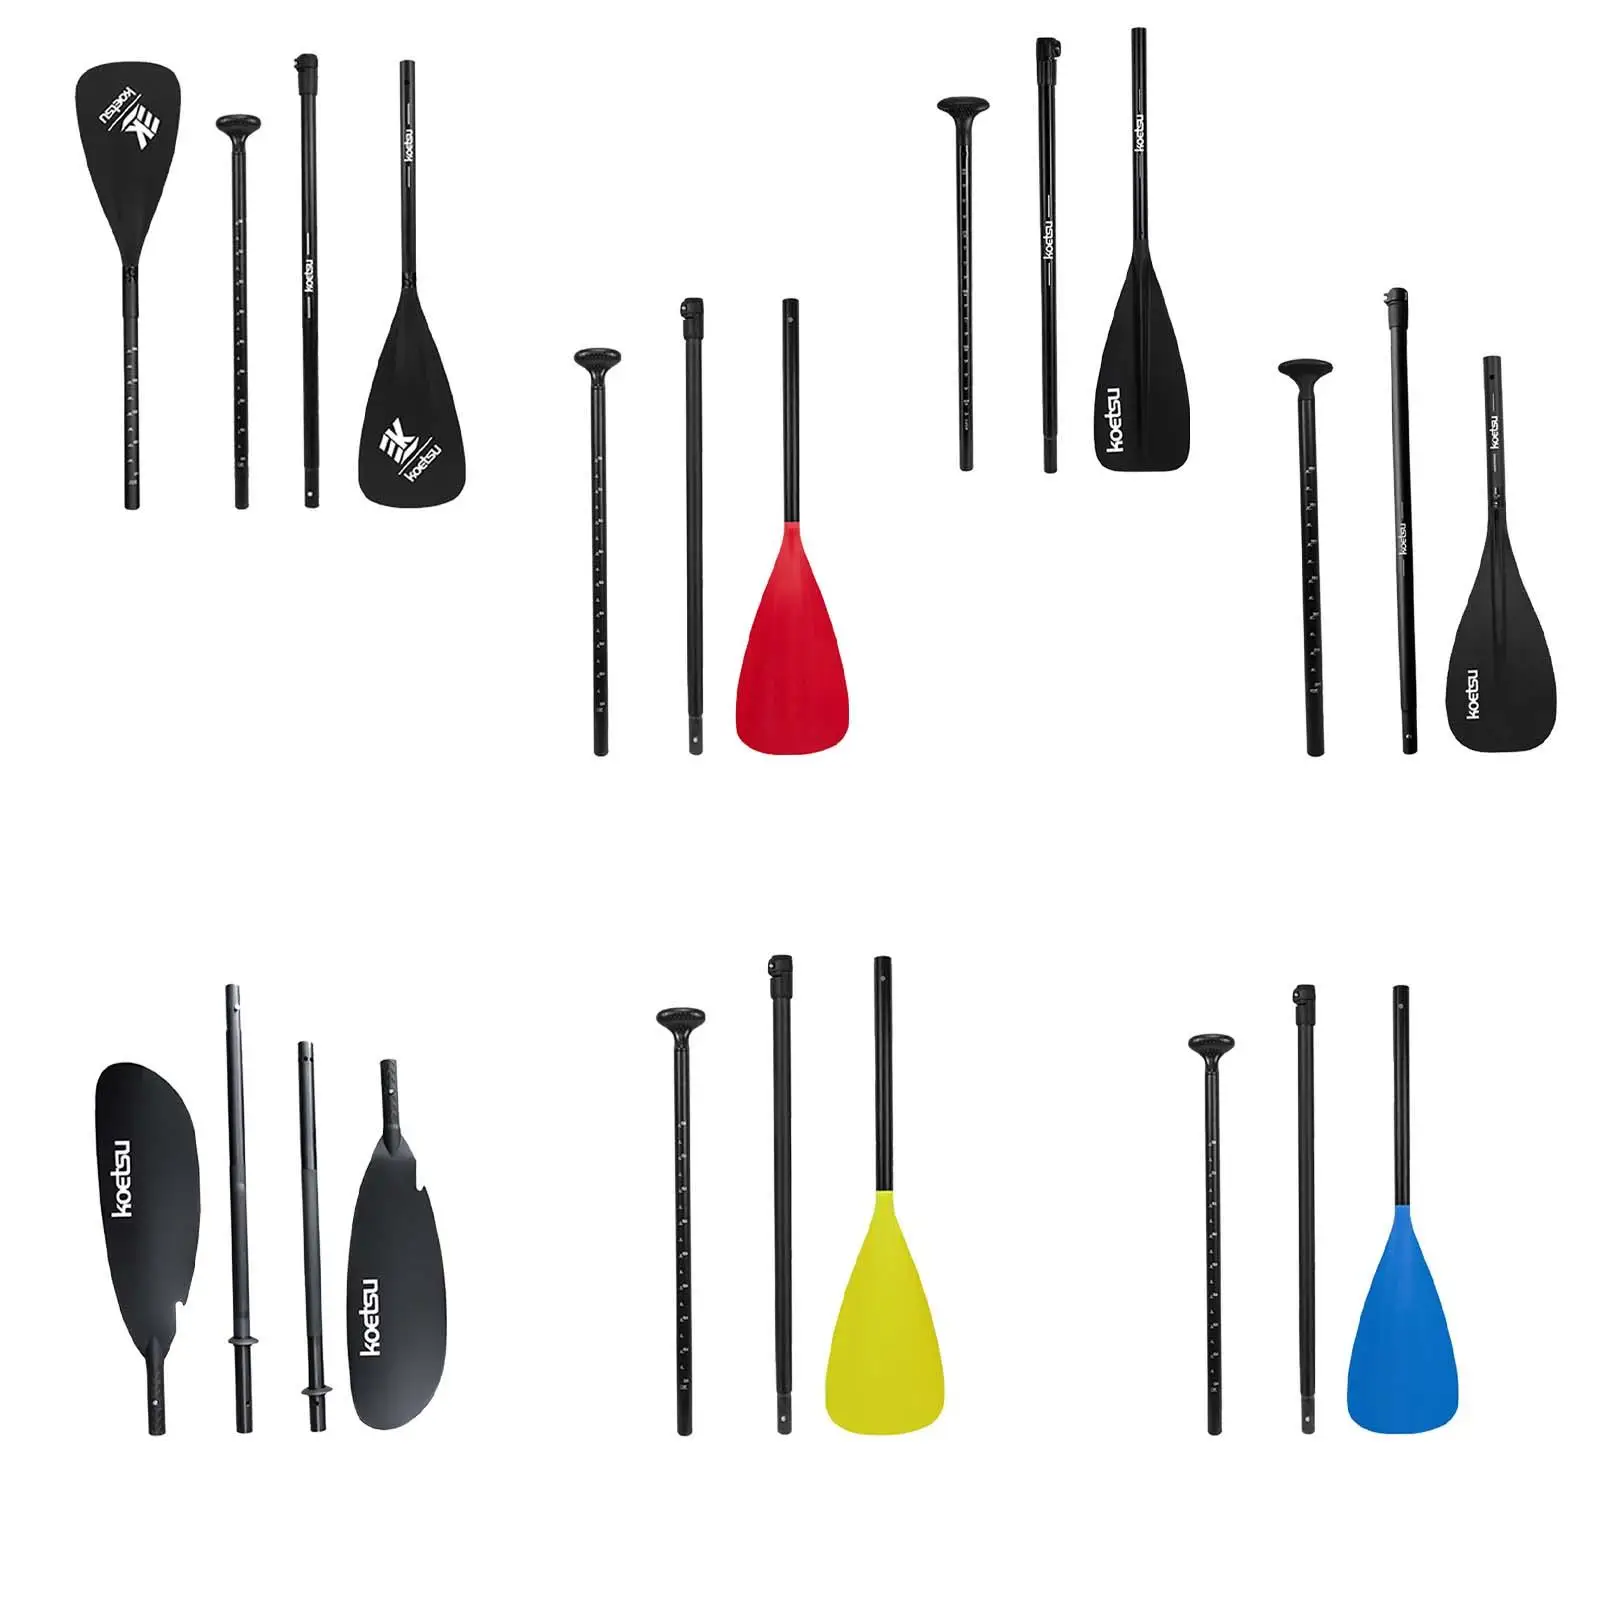 Kayak Paddles Boat Oar Lightweight Aluminum Alloy Boat Paddle Detachable Kayak Oars for All Kinds of Kayaks and Boats